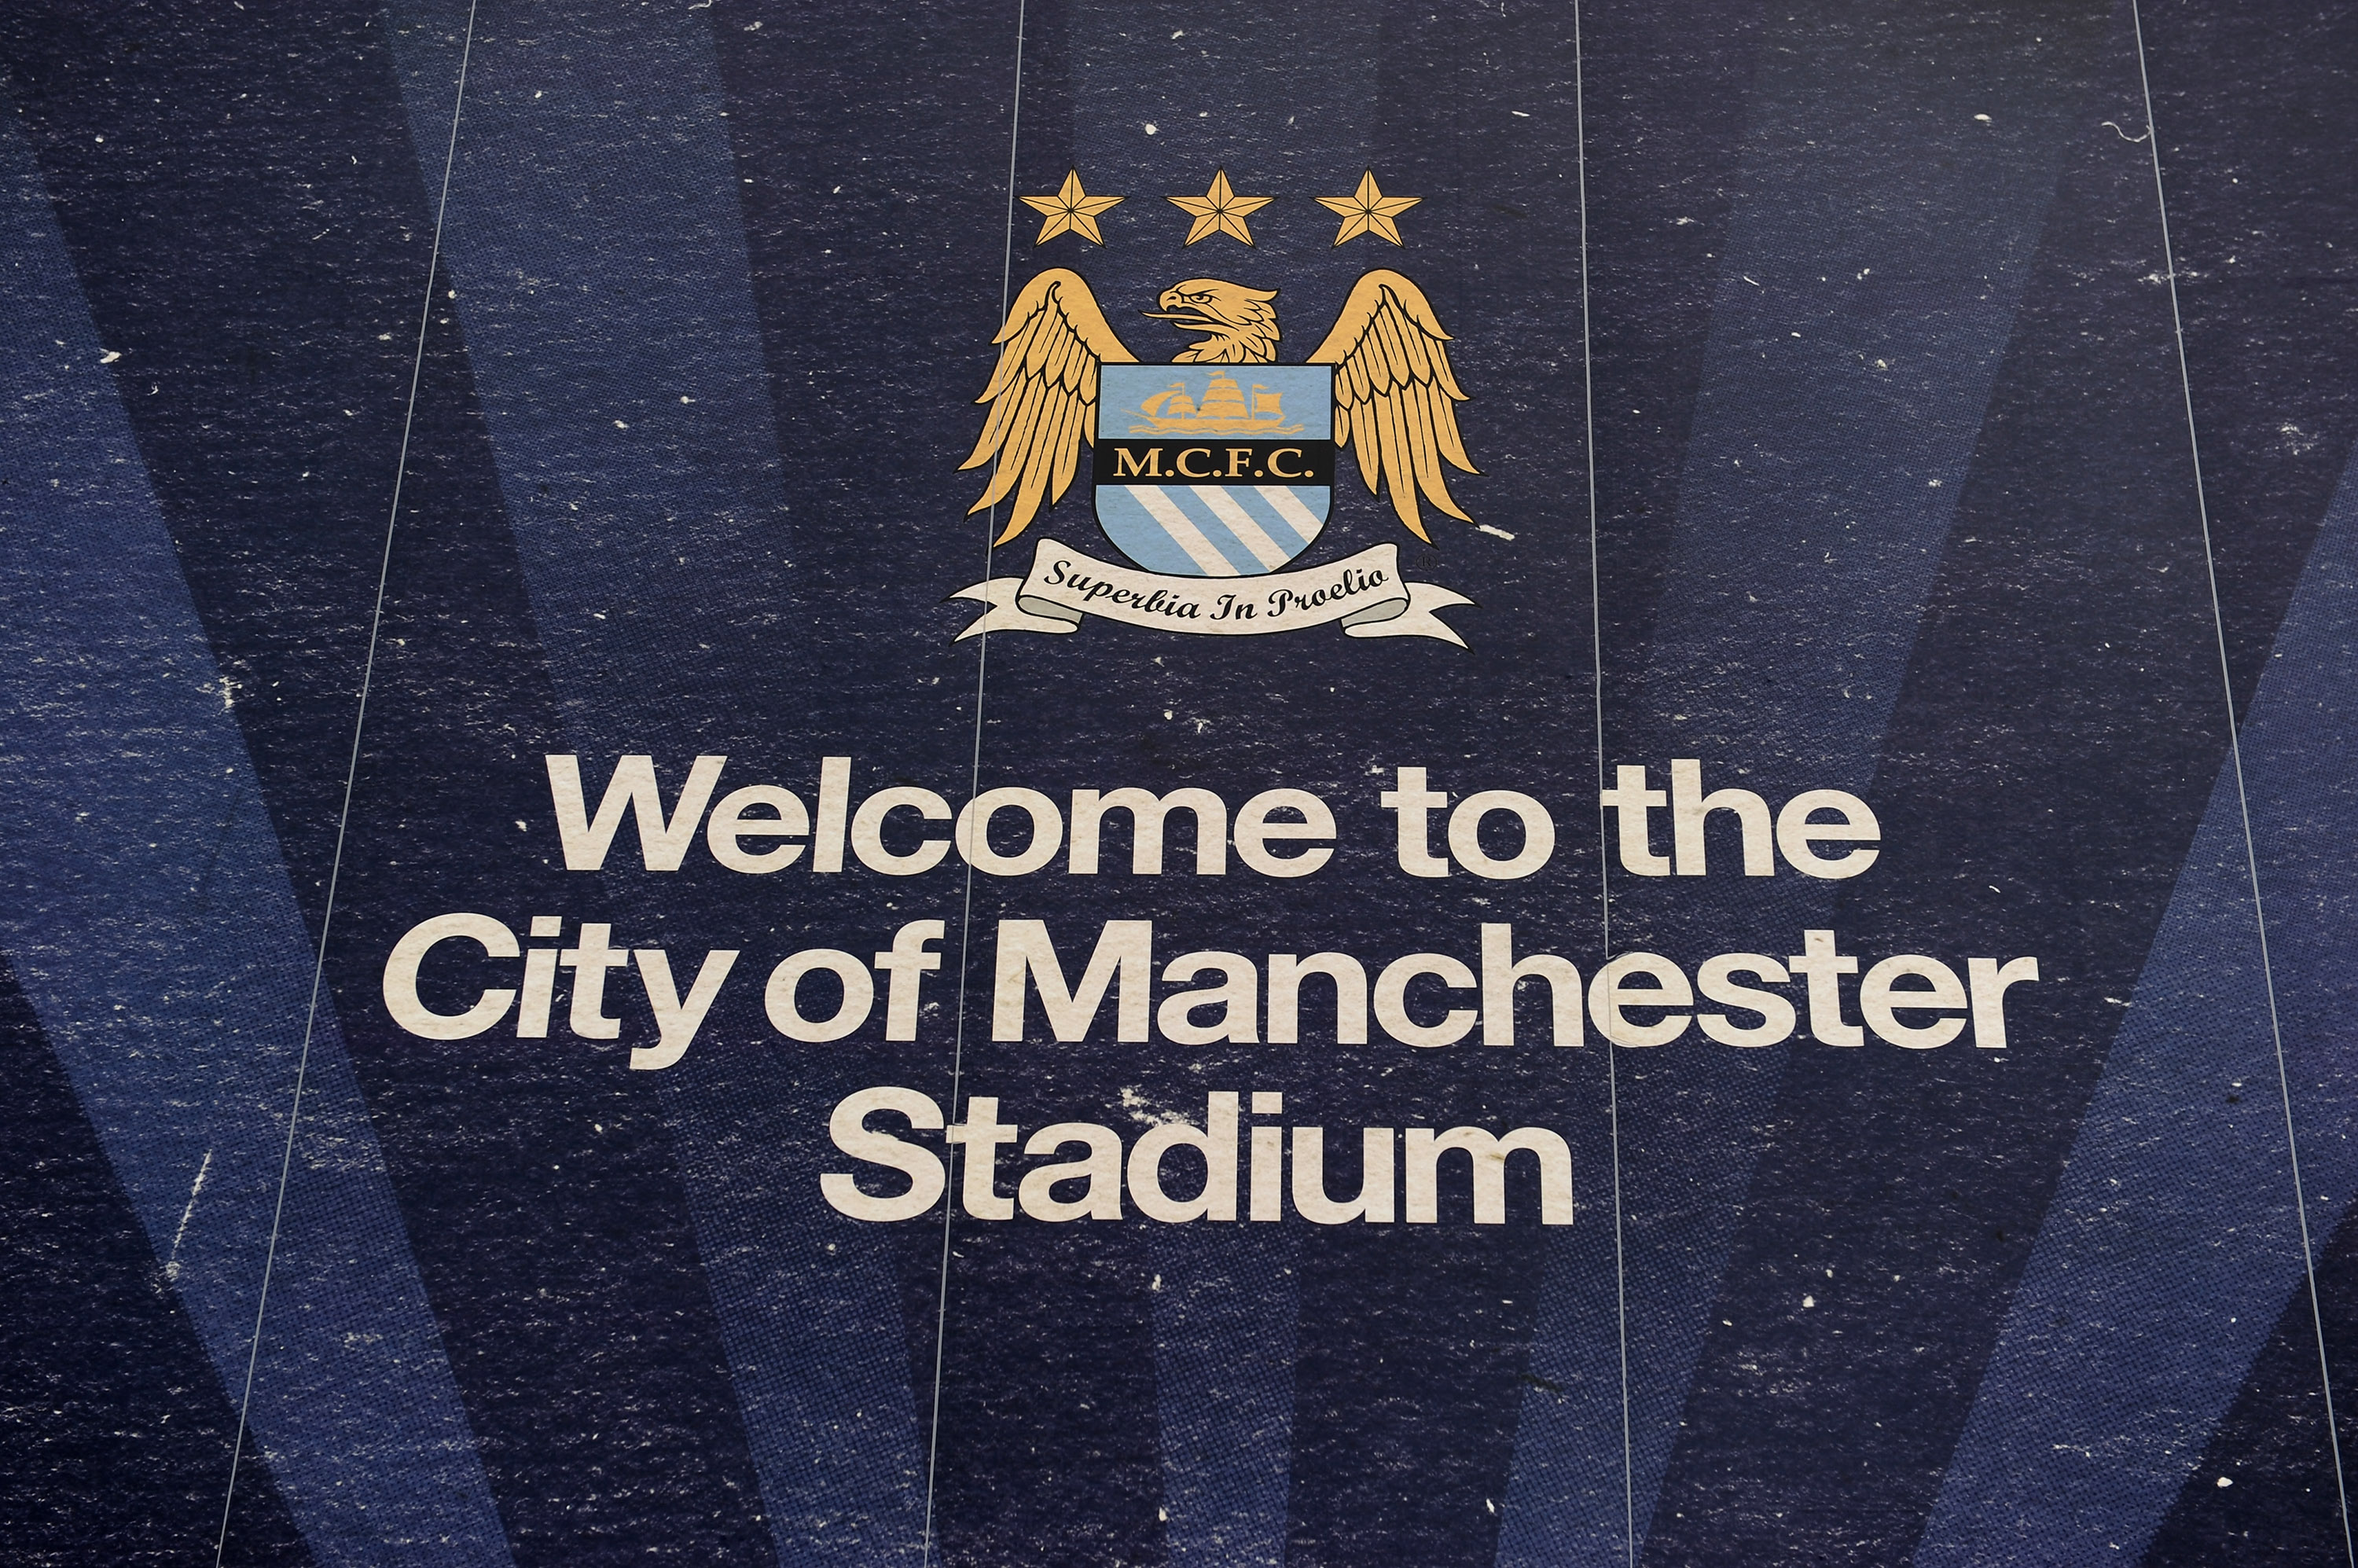 MANCHESTER, ENGLAND - FEBRUARY 27:  A General View of signage outside The City of Manchester Stadium, home of Manchester City FC on February 27, 2011 in Manchester, England.  (Photo by Jamie McDonald/Getty Images)